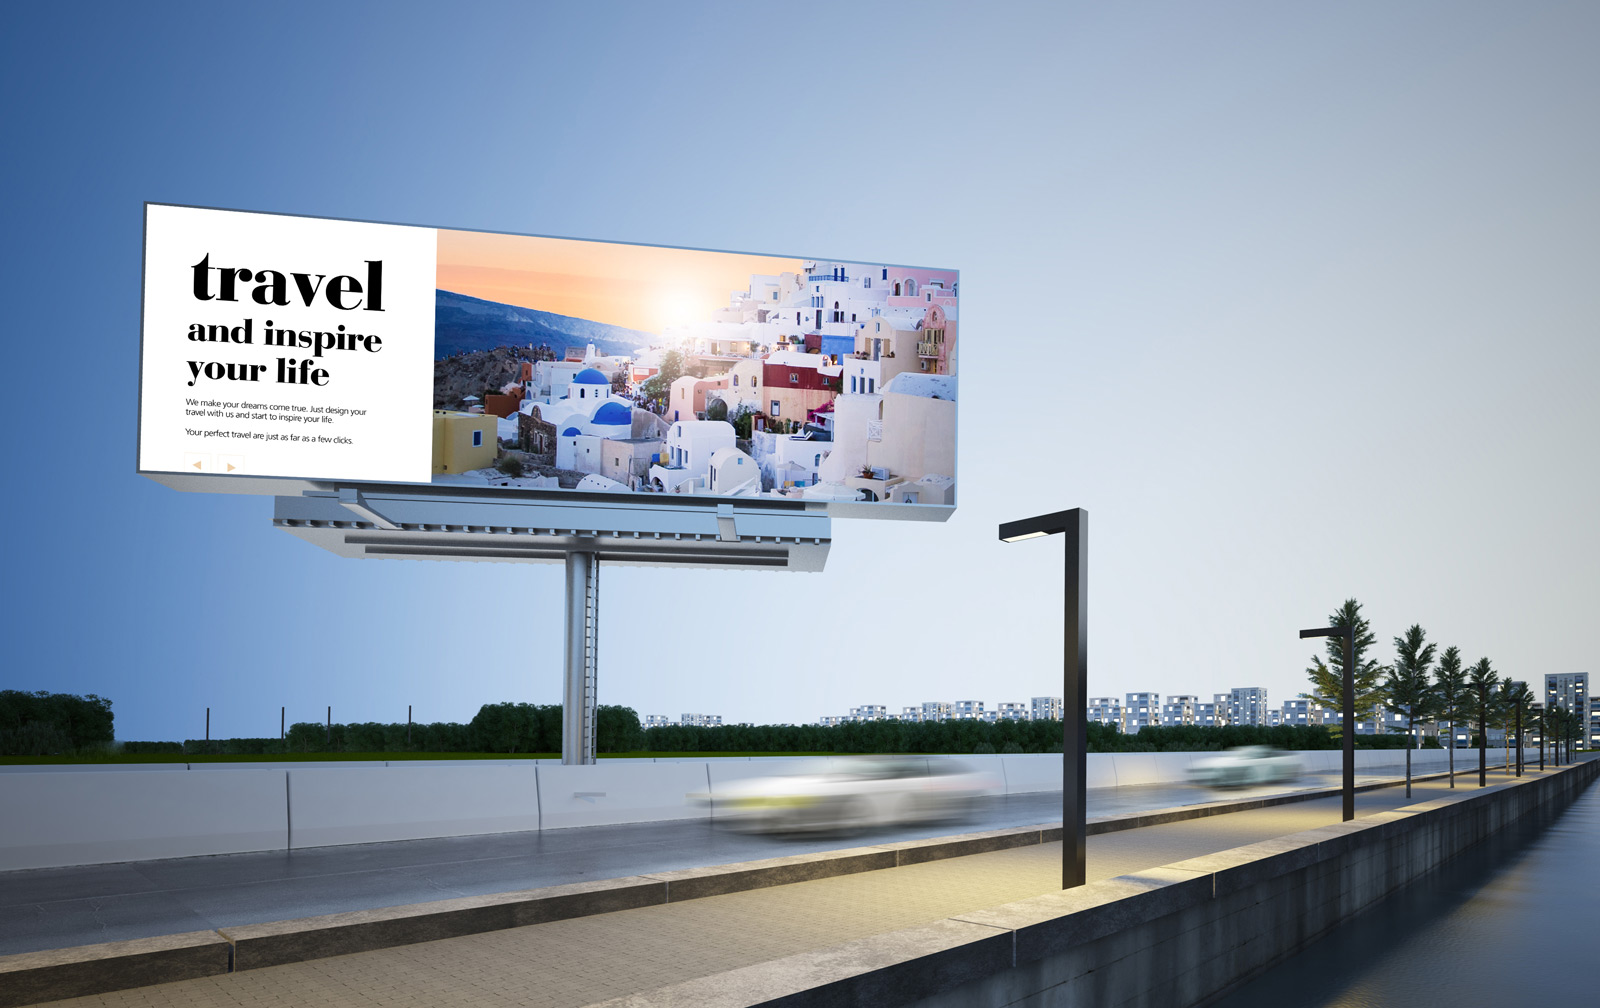 Travel-themed outdoor advertising